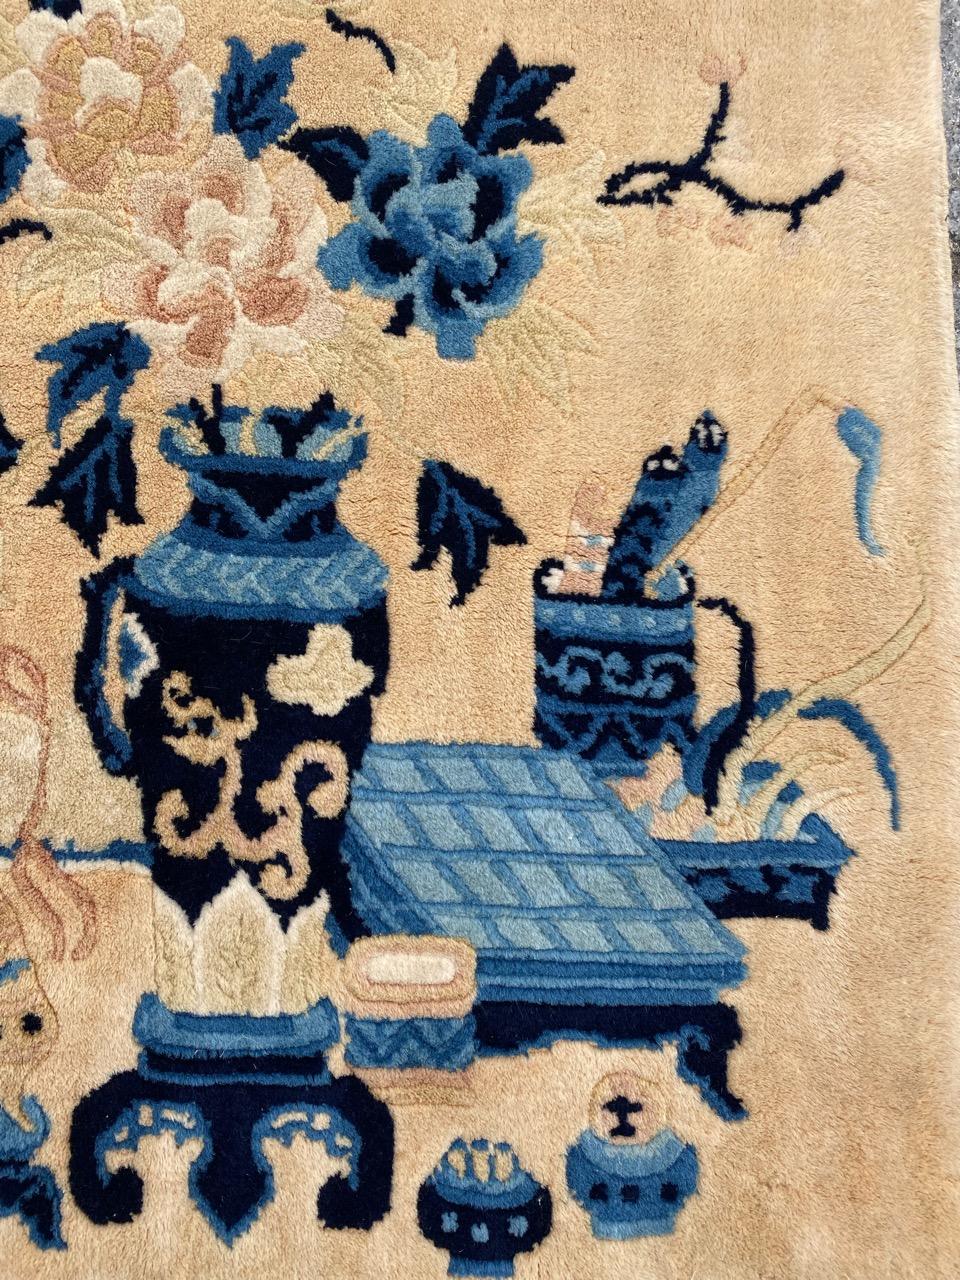 Exquisite Beijing Chinese rug adorned with a captivating design and vibrant colors. Meticulously hand-knotted with wool velvet on a cotton foundation. The intricate pattern, featuring vases of flowers, stools, tables, and shelves, beautifully